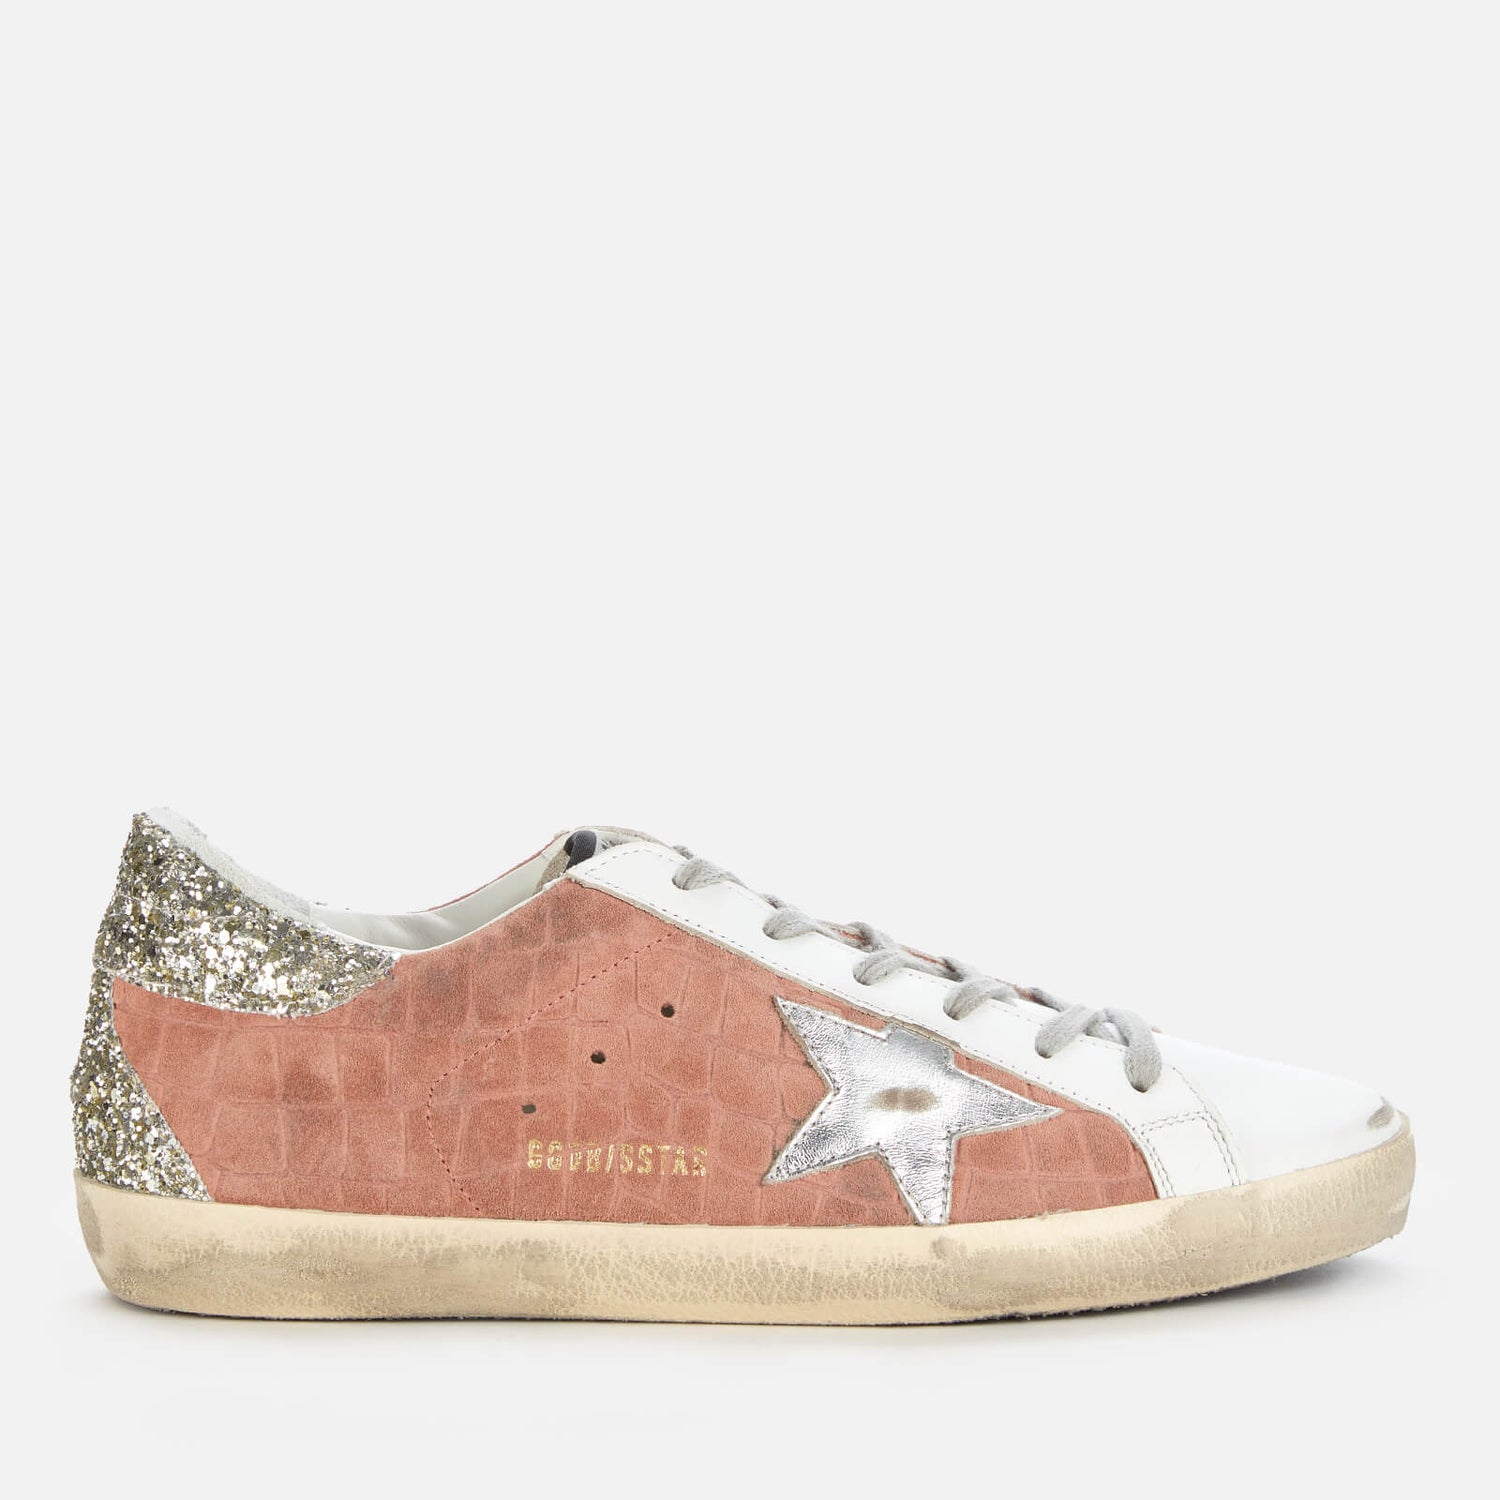 Golden Goose Women's Superstar Croc Printed Leather Trainers - Mauve/White/Silver - UK 3